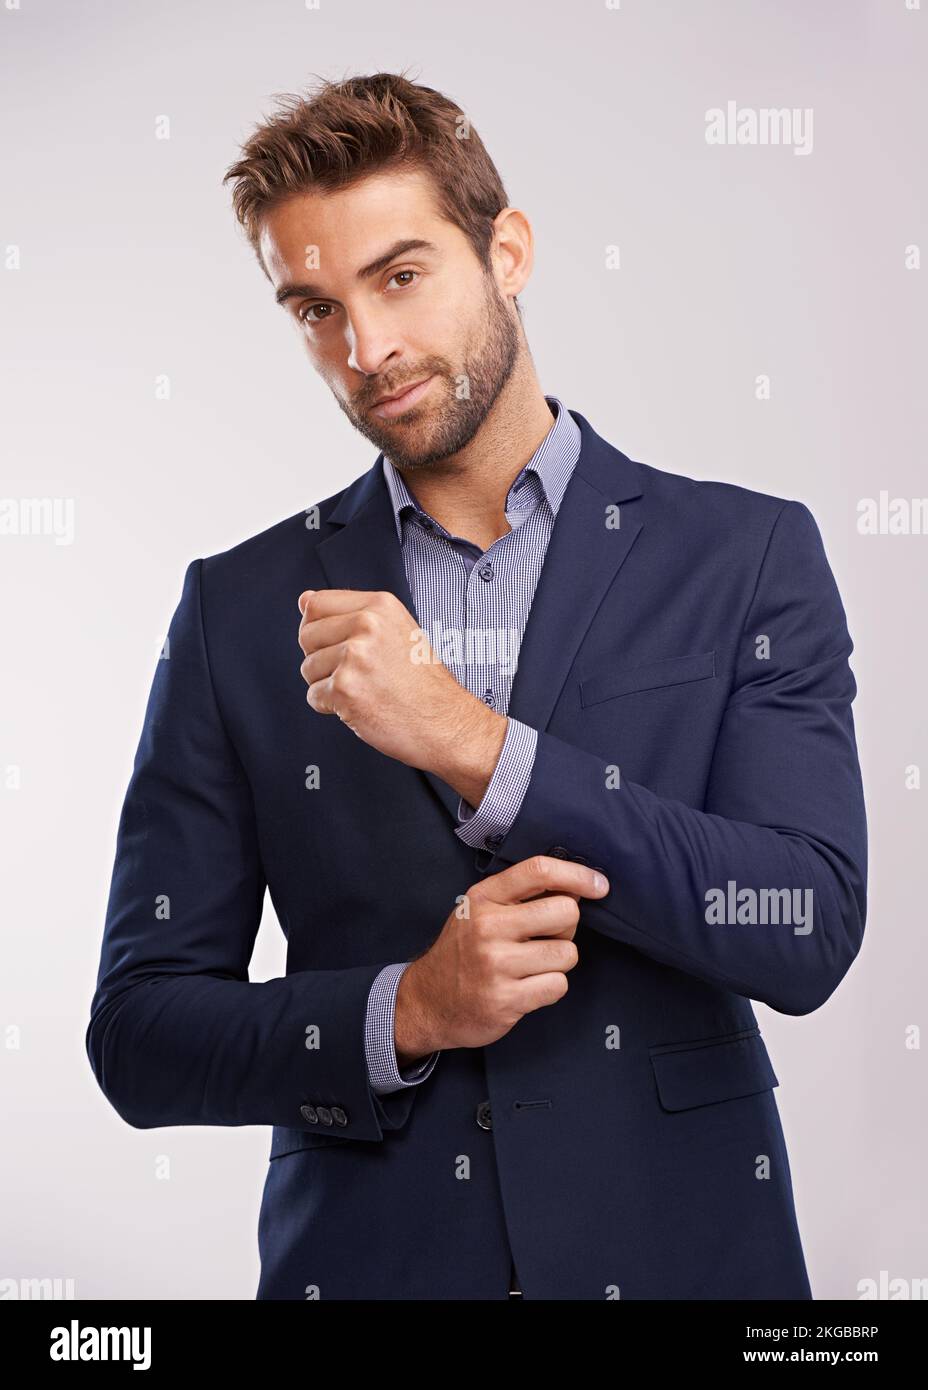 Dressed to impress. Studio portrait of a handsome well-dressed man against a gray background. Stock Photo